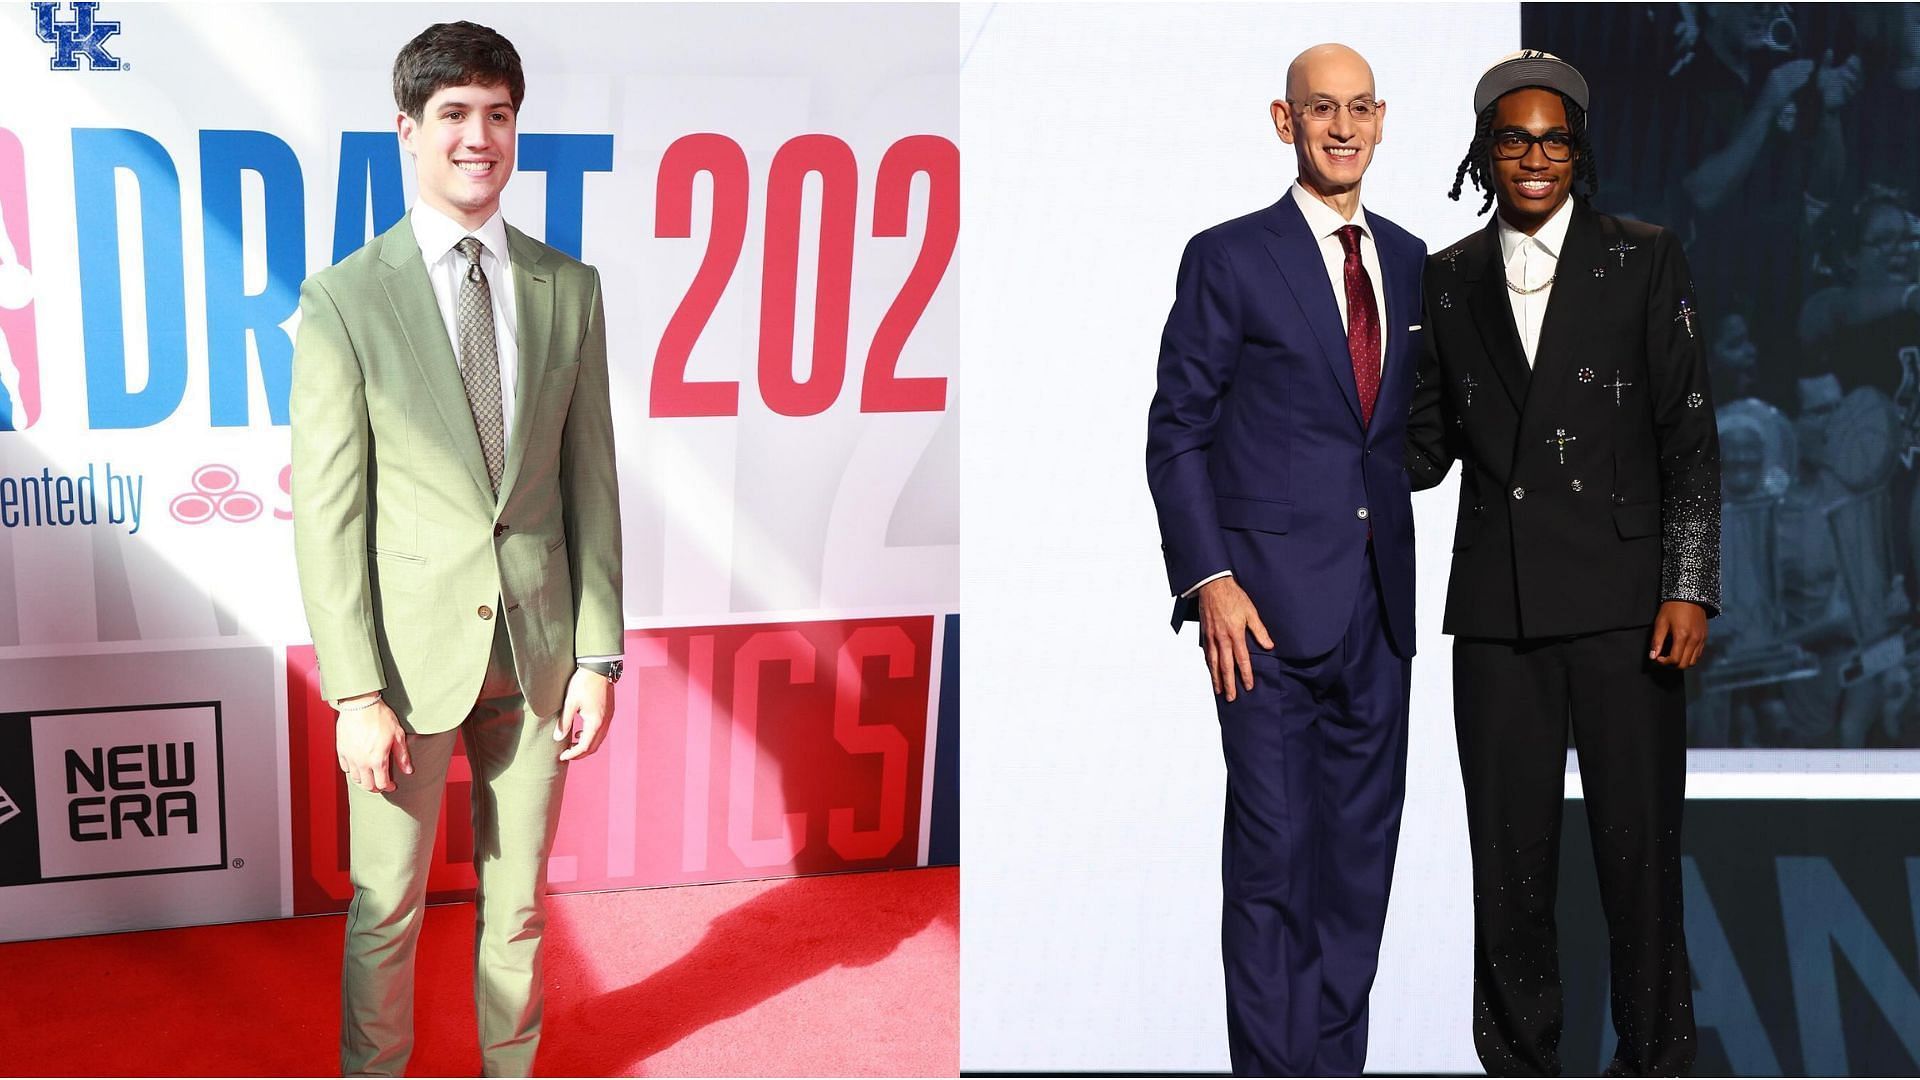 Reed Sheppard and Rob Dillingham at the 2024 NBA draft